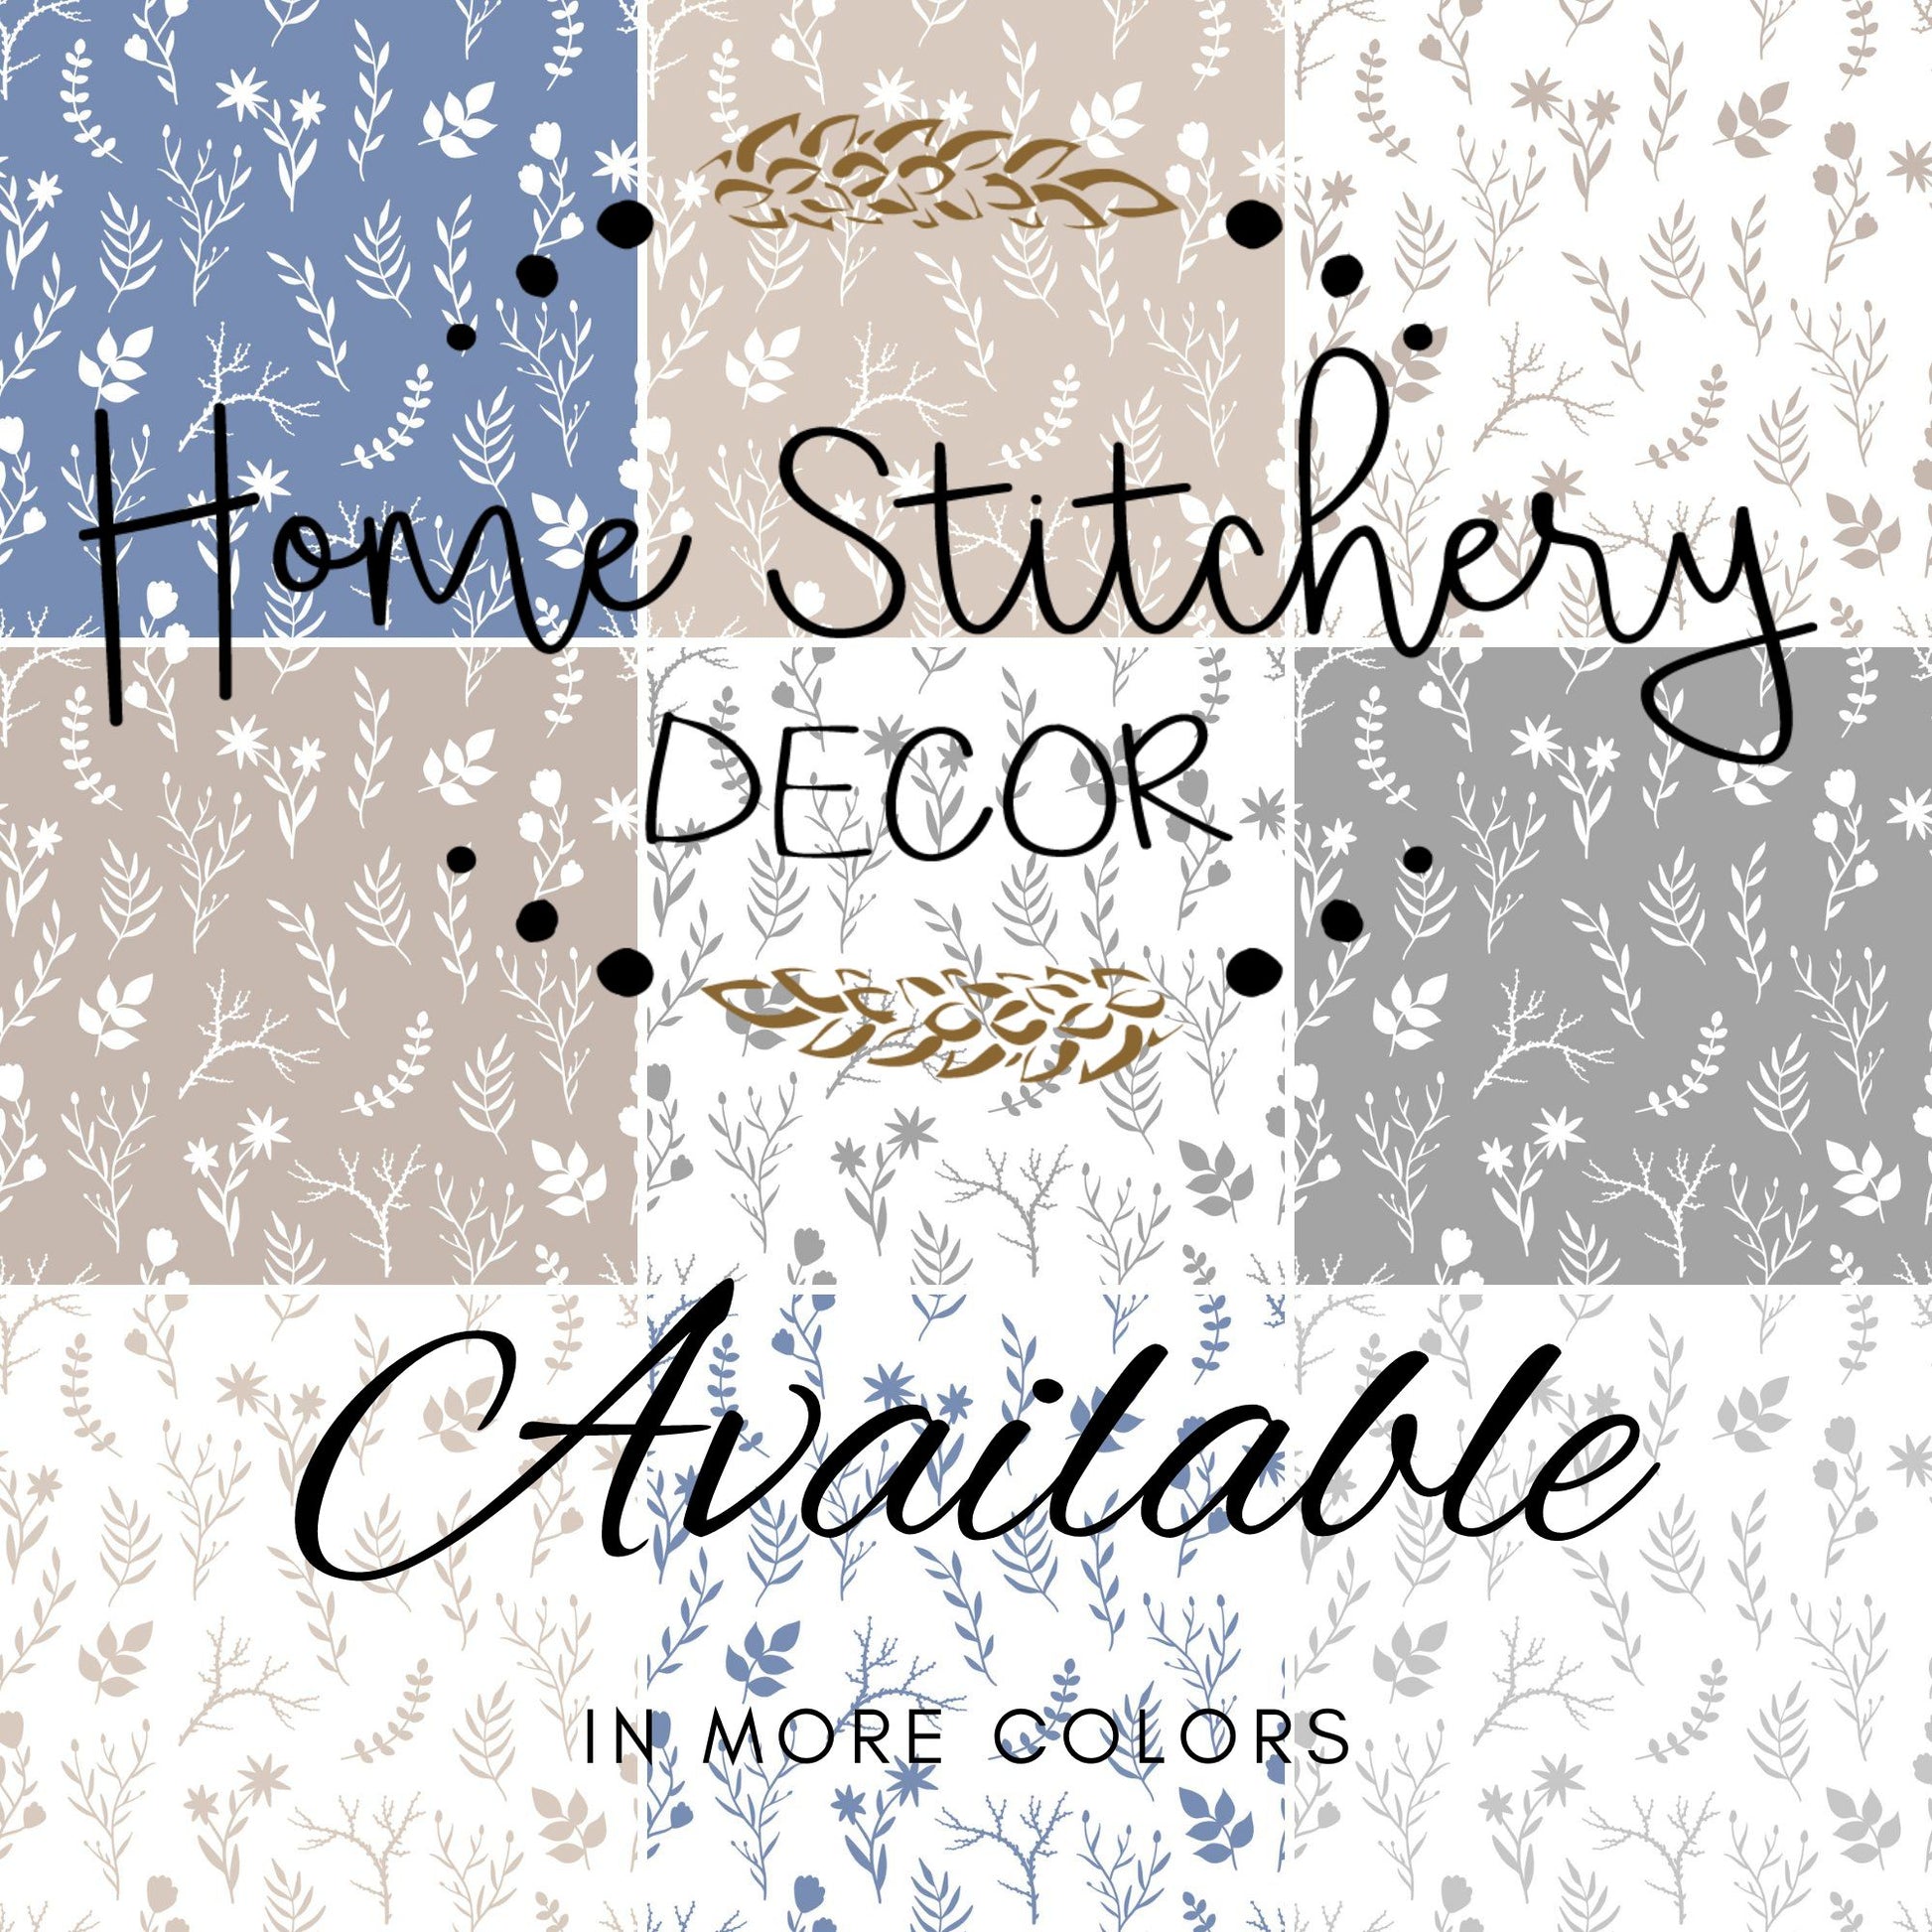 Color options for Home Stitchery Decor Bedding. Part of a mix and match collection of modern farmhouse styled products.  Shop the collections or follow along on the Home Stitchery Decor YouTube Channel.